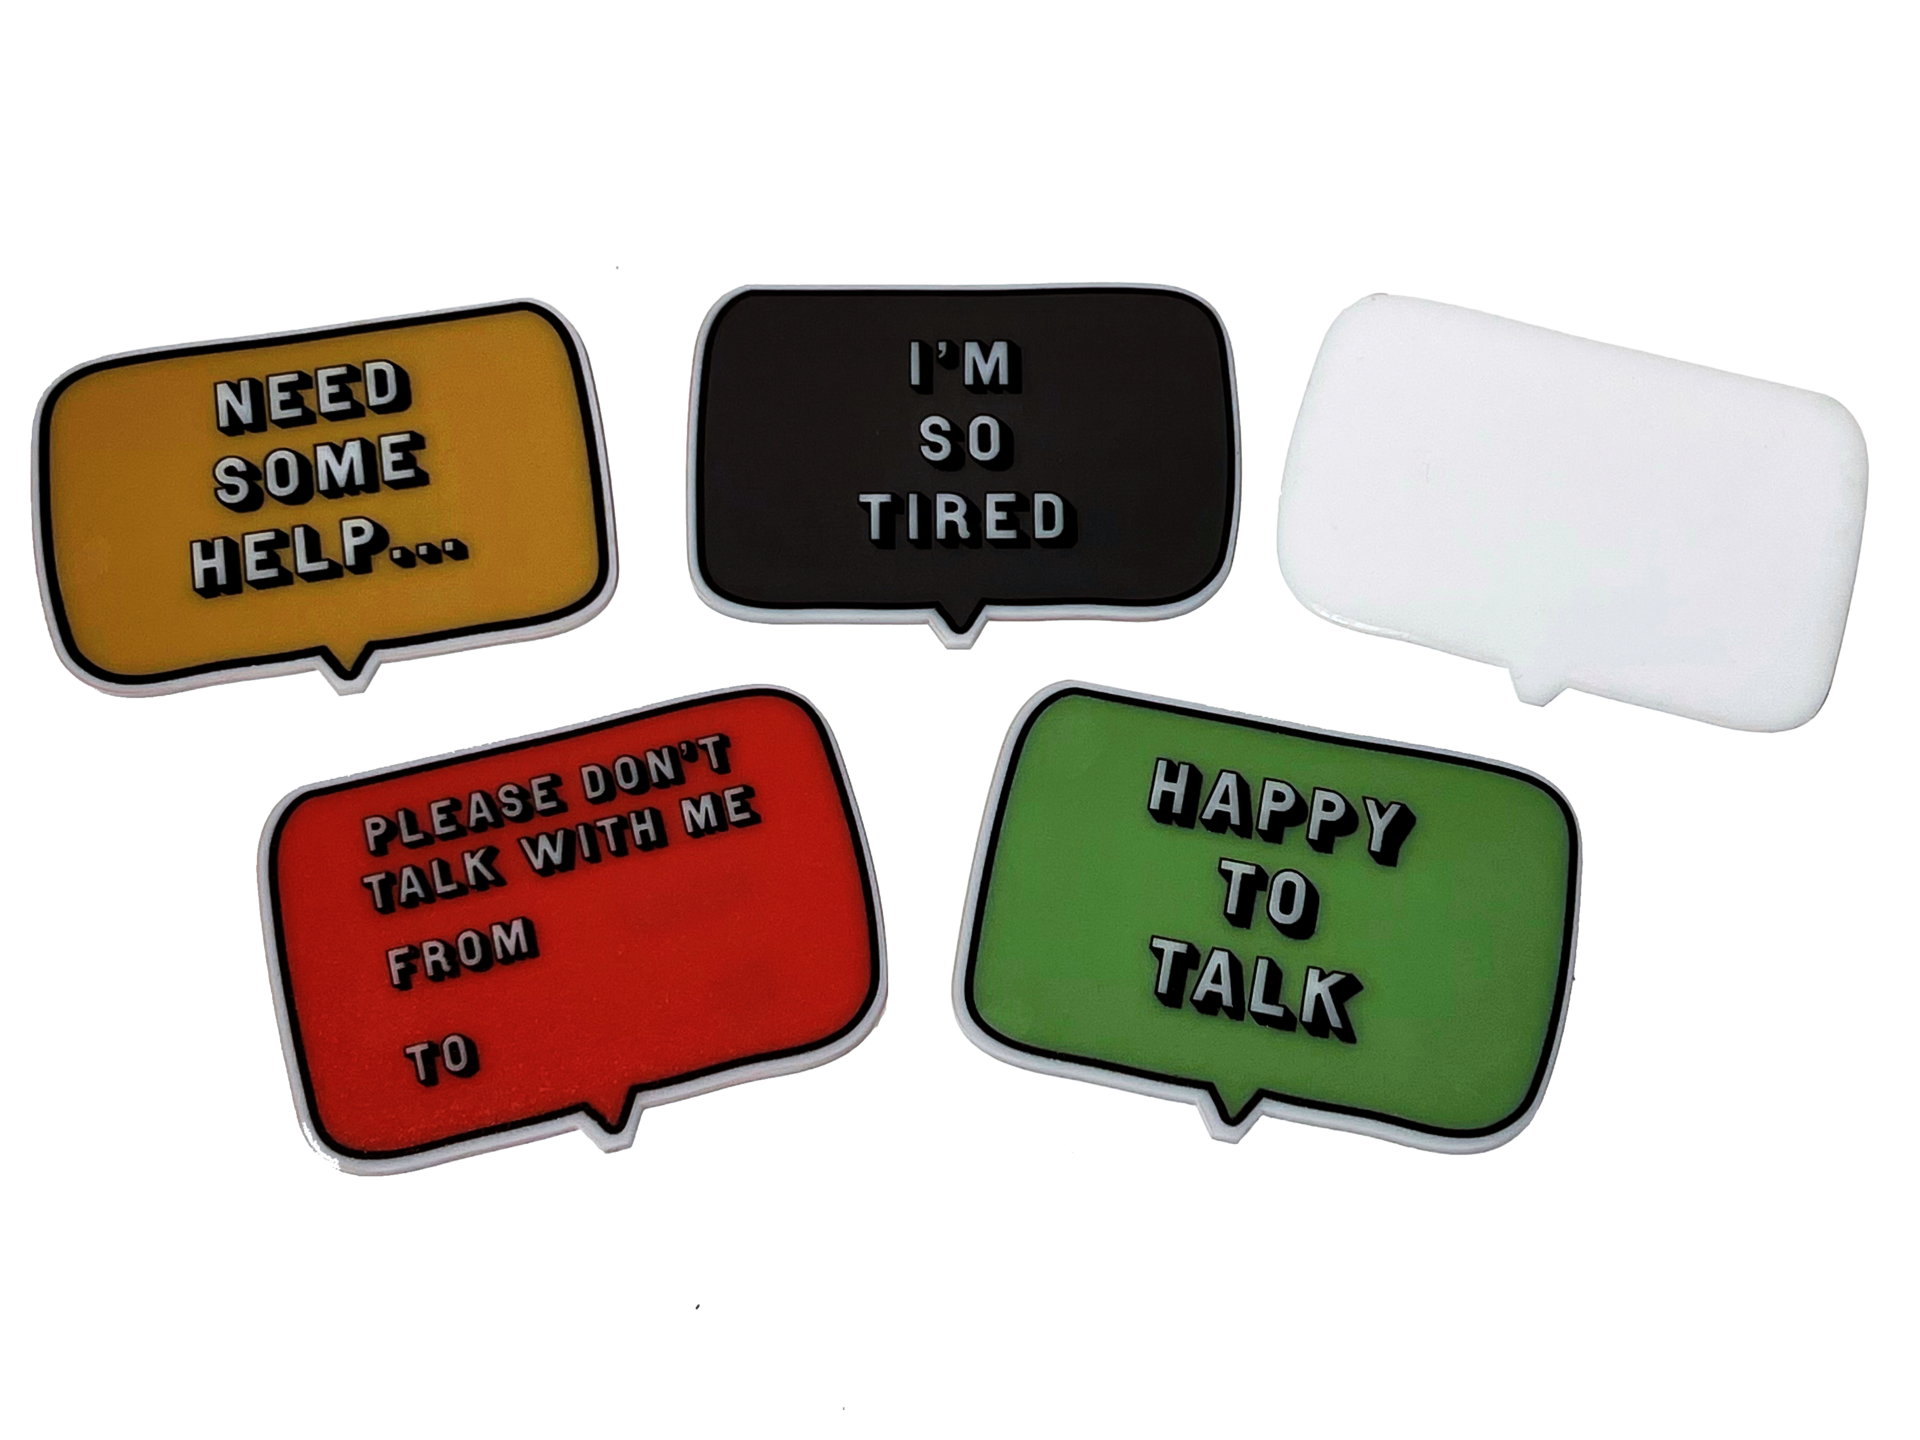 Status badges that are wearable to indicate current feelings or needs